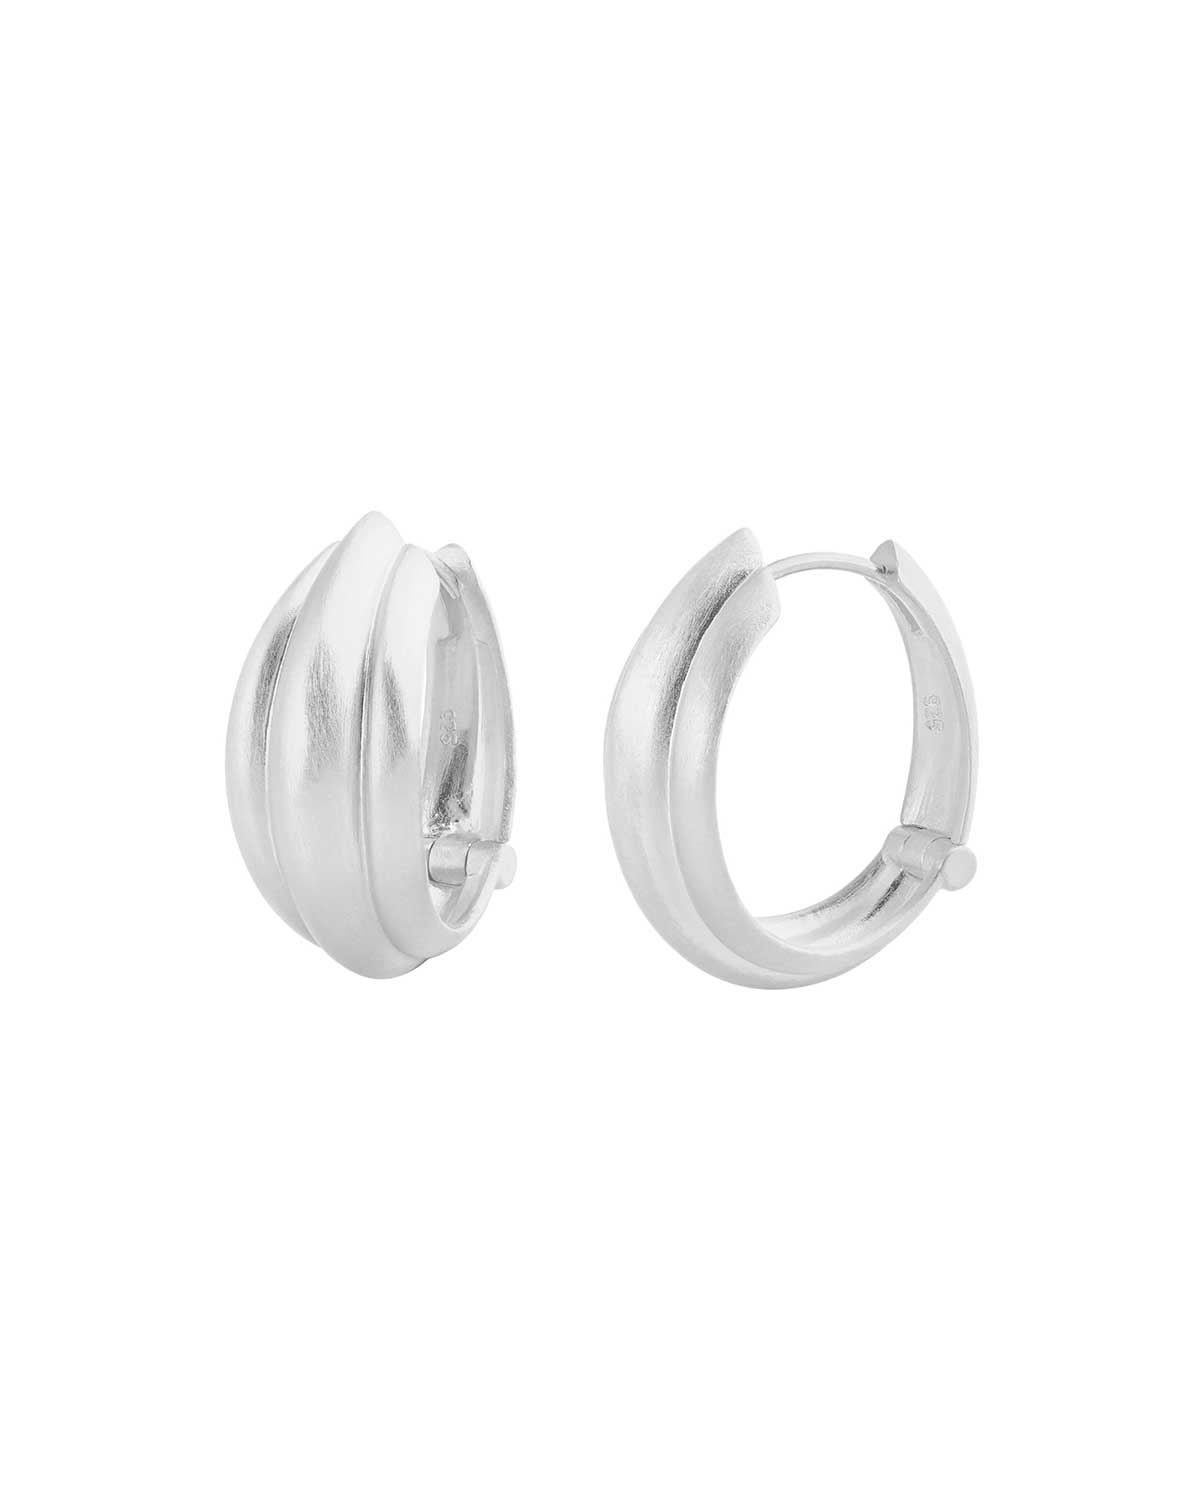 'The Pasiphae’ Bold Silver Hoops - Moon London